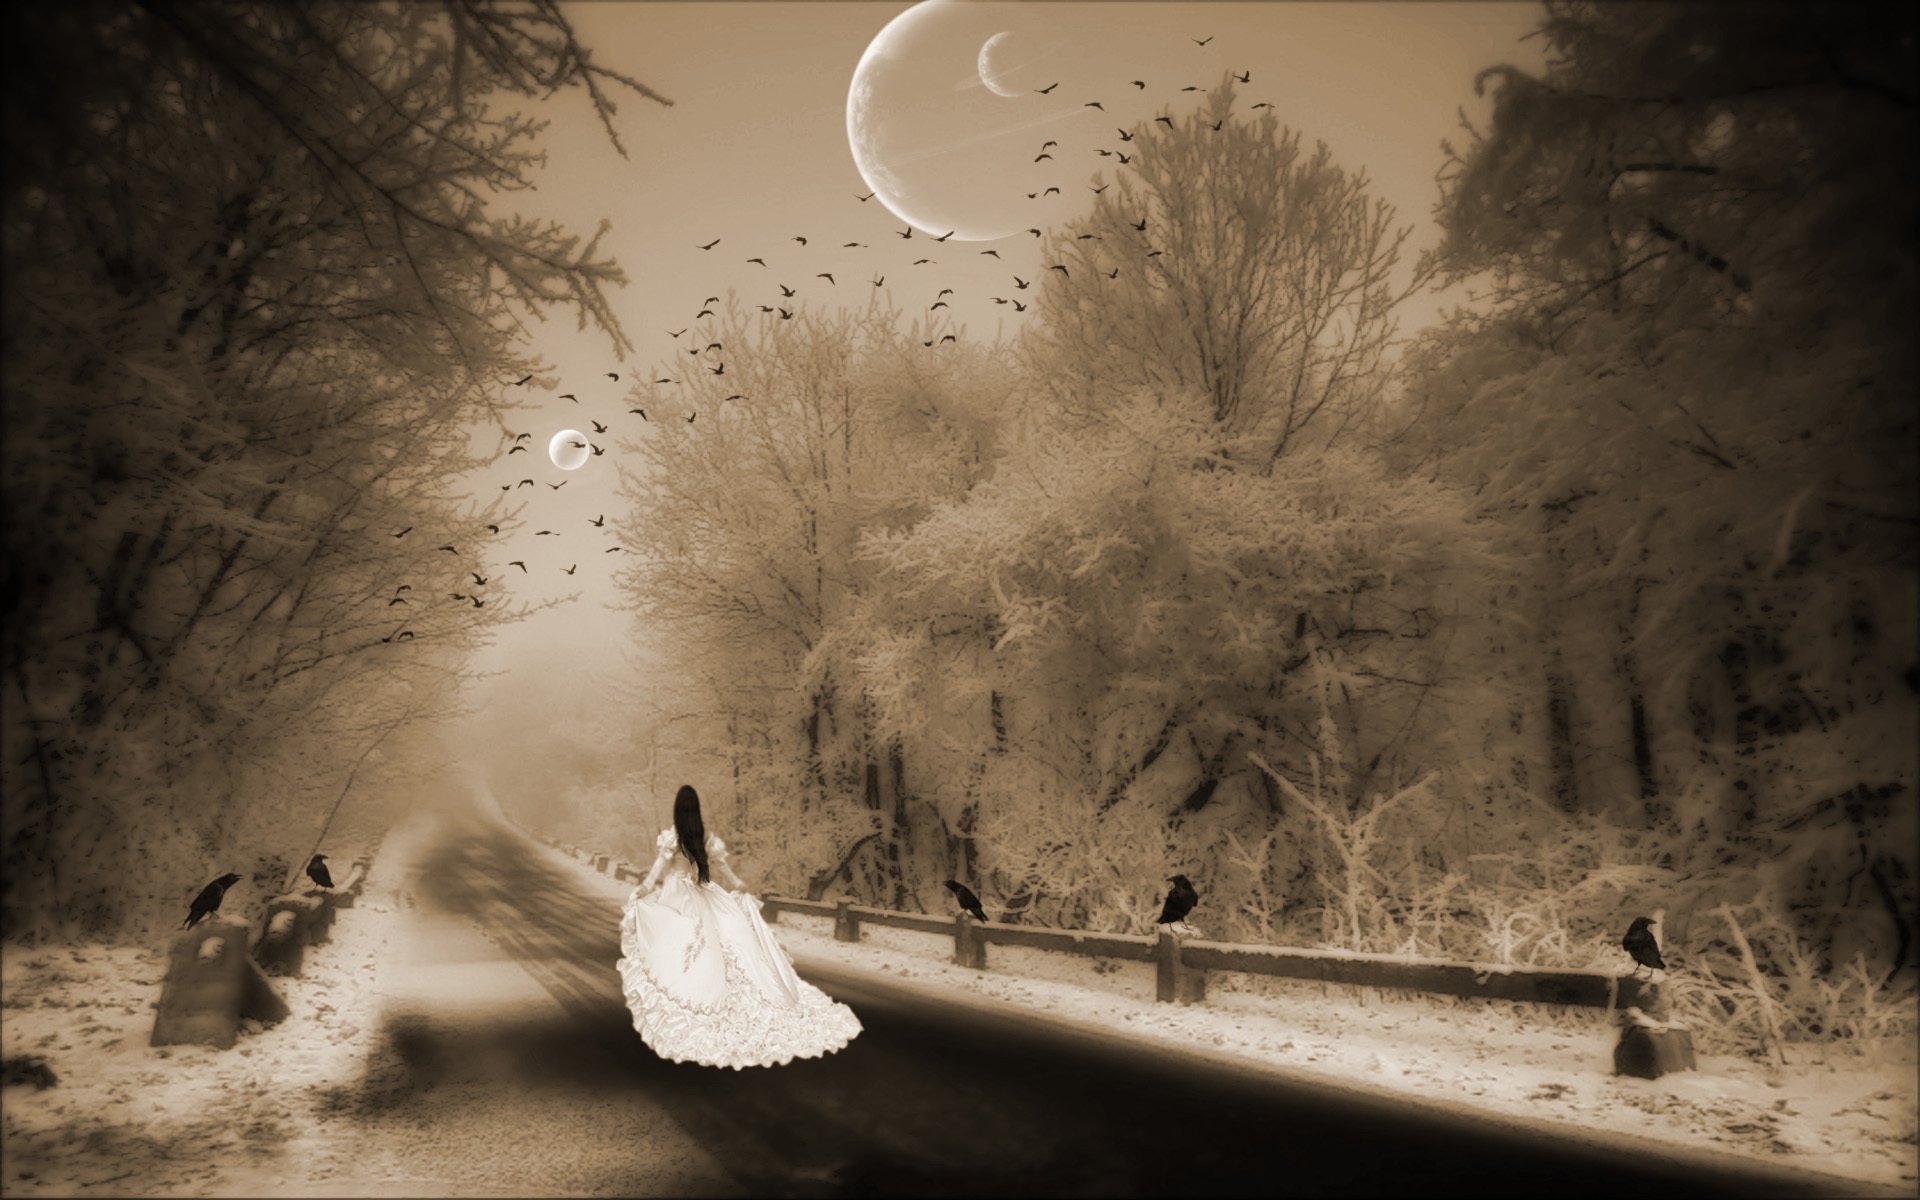 lonely, Mood, Sad, Alone, Sadness, Emotion, People, Loneliness, Solitude, Gothic, Fantasy, Girl, Photoshop, Road, Winter, Moon Wallpaper